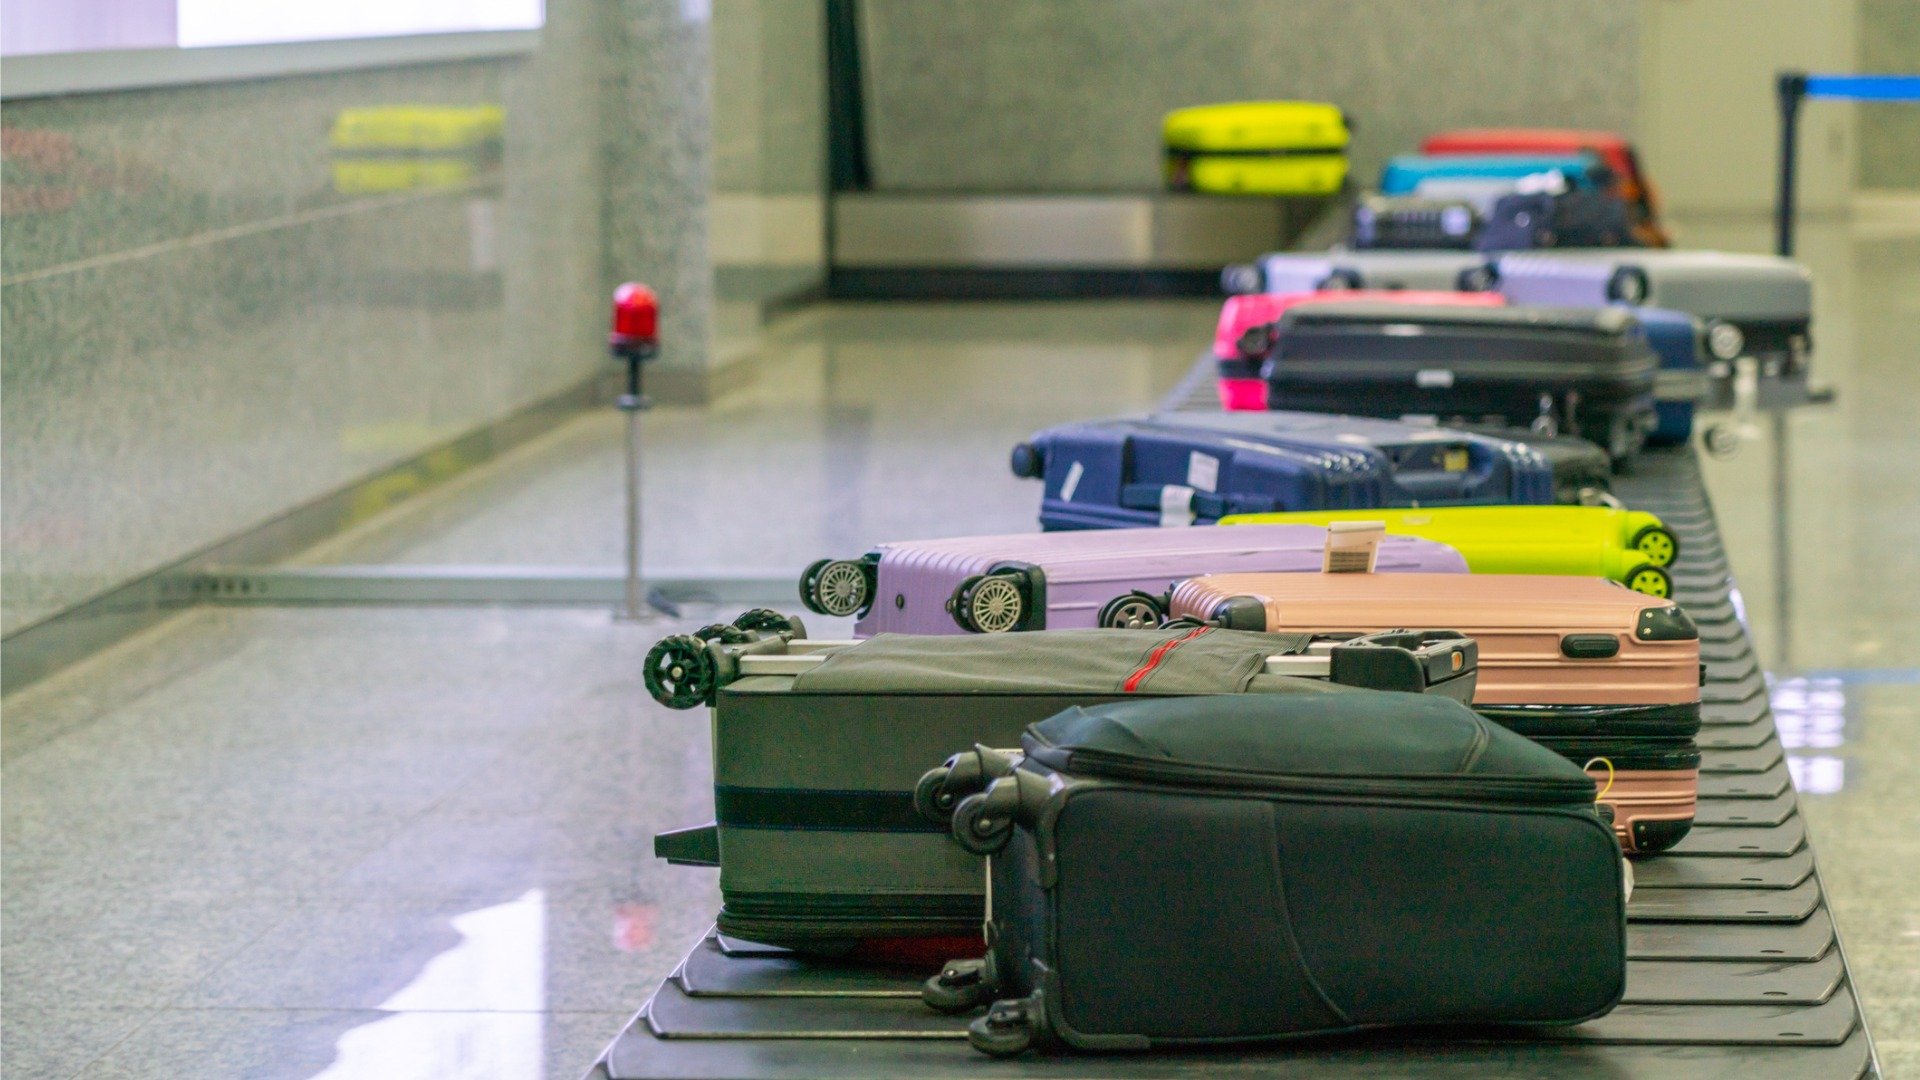 This image shows a dozen suitcases on a conveyor belt at an airport. 